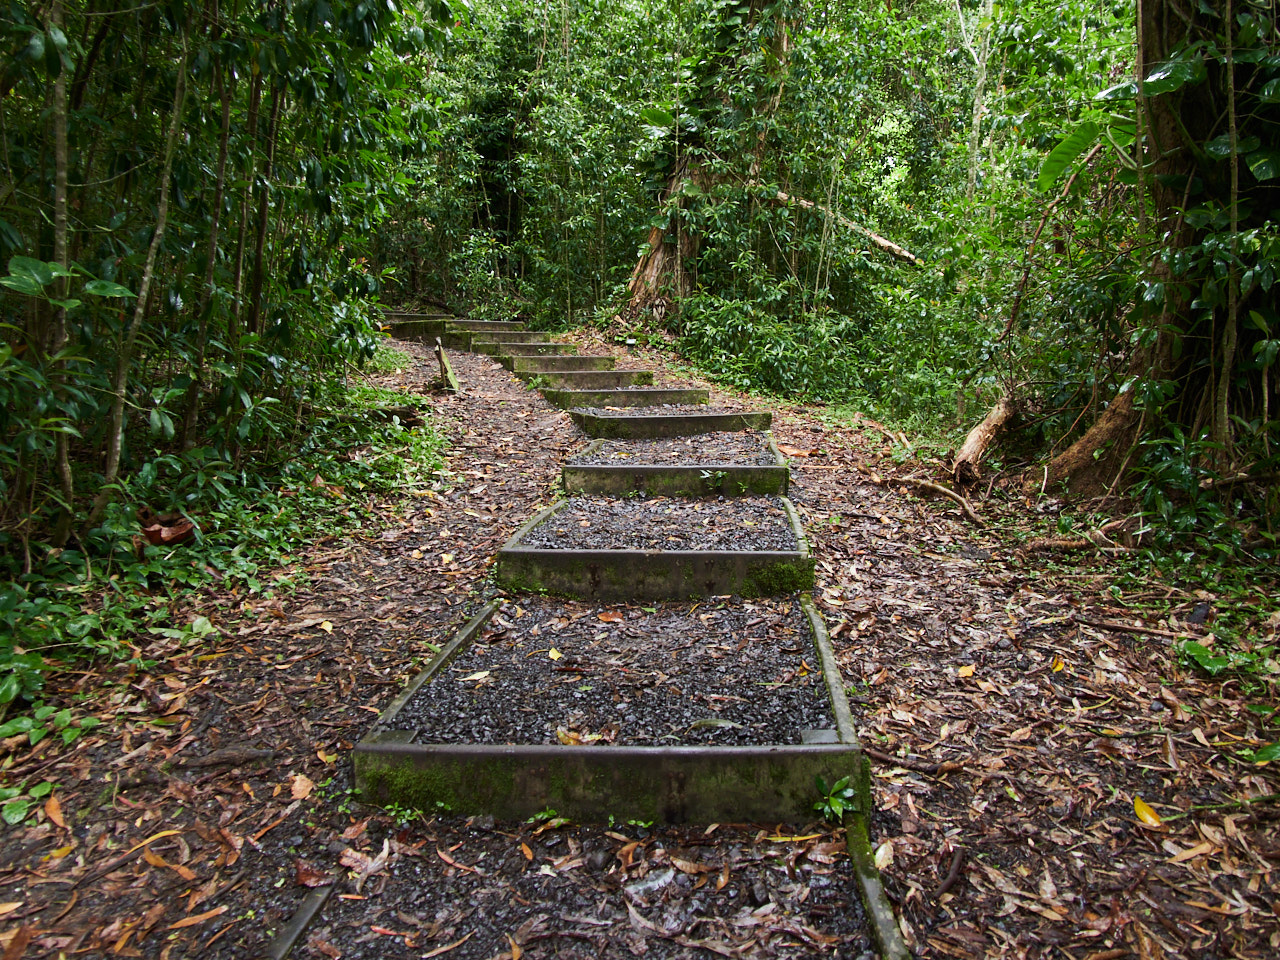 Considering the presence of some big steps, the trail is quite easy and accessible to those who can walk.